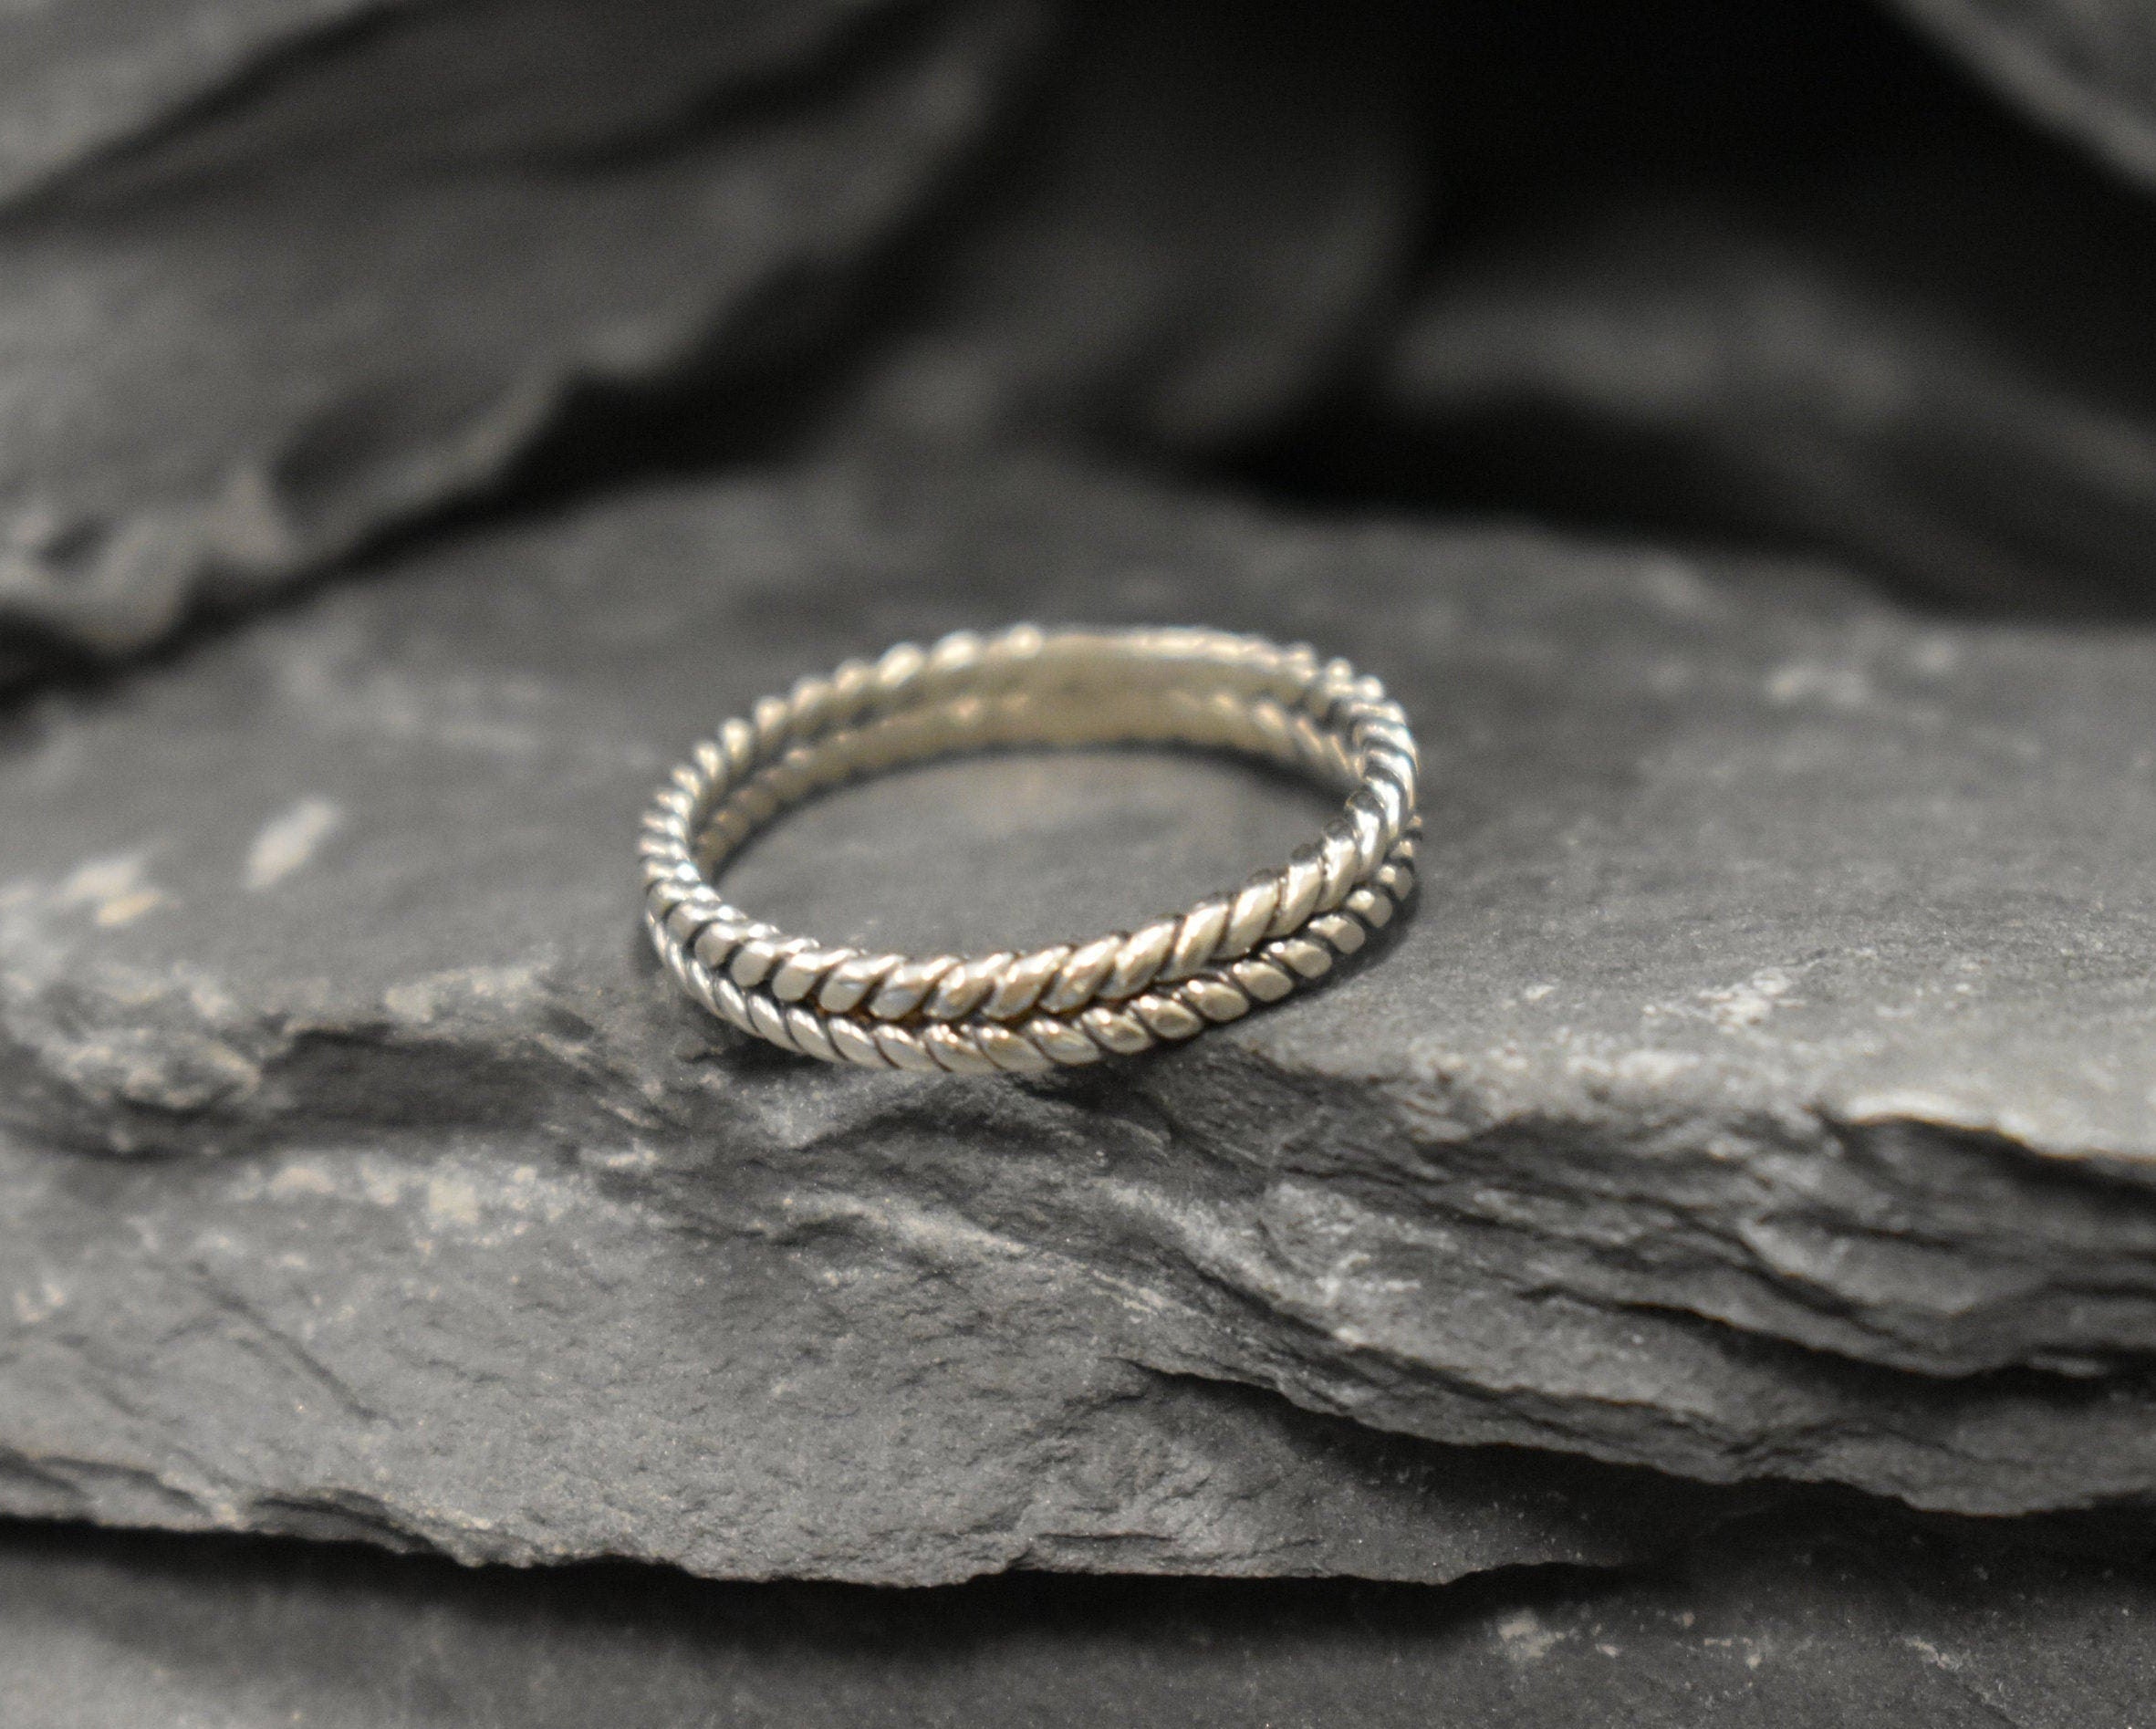 Silver Plaited Band, Fishtail Band, Stackable Band, Dainty Ring, Plaited Ring, Vintage Band, Oxidised Silver Band, Solid Silver Band